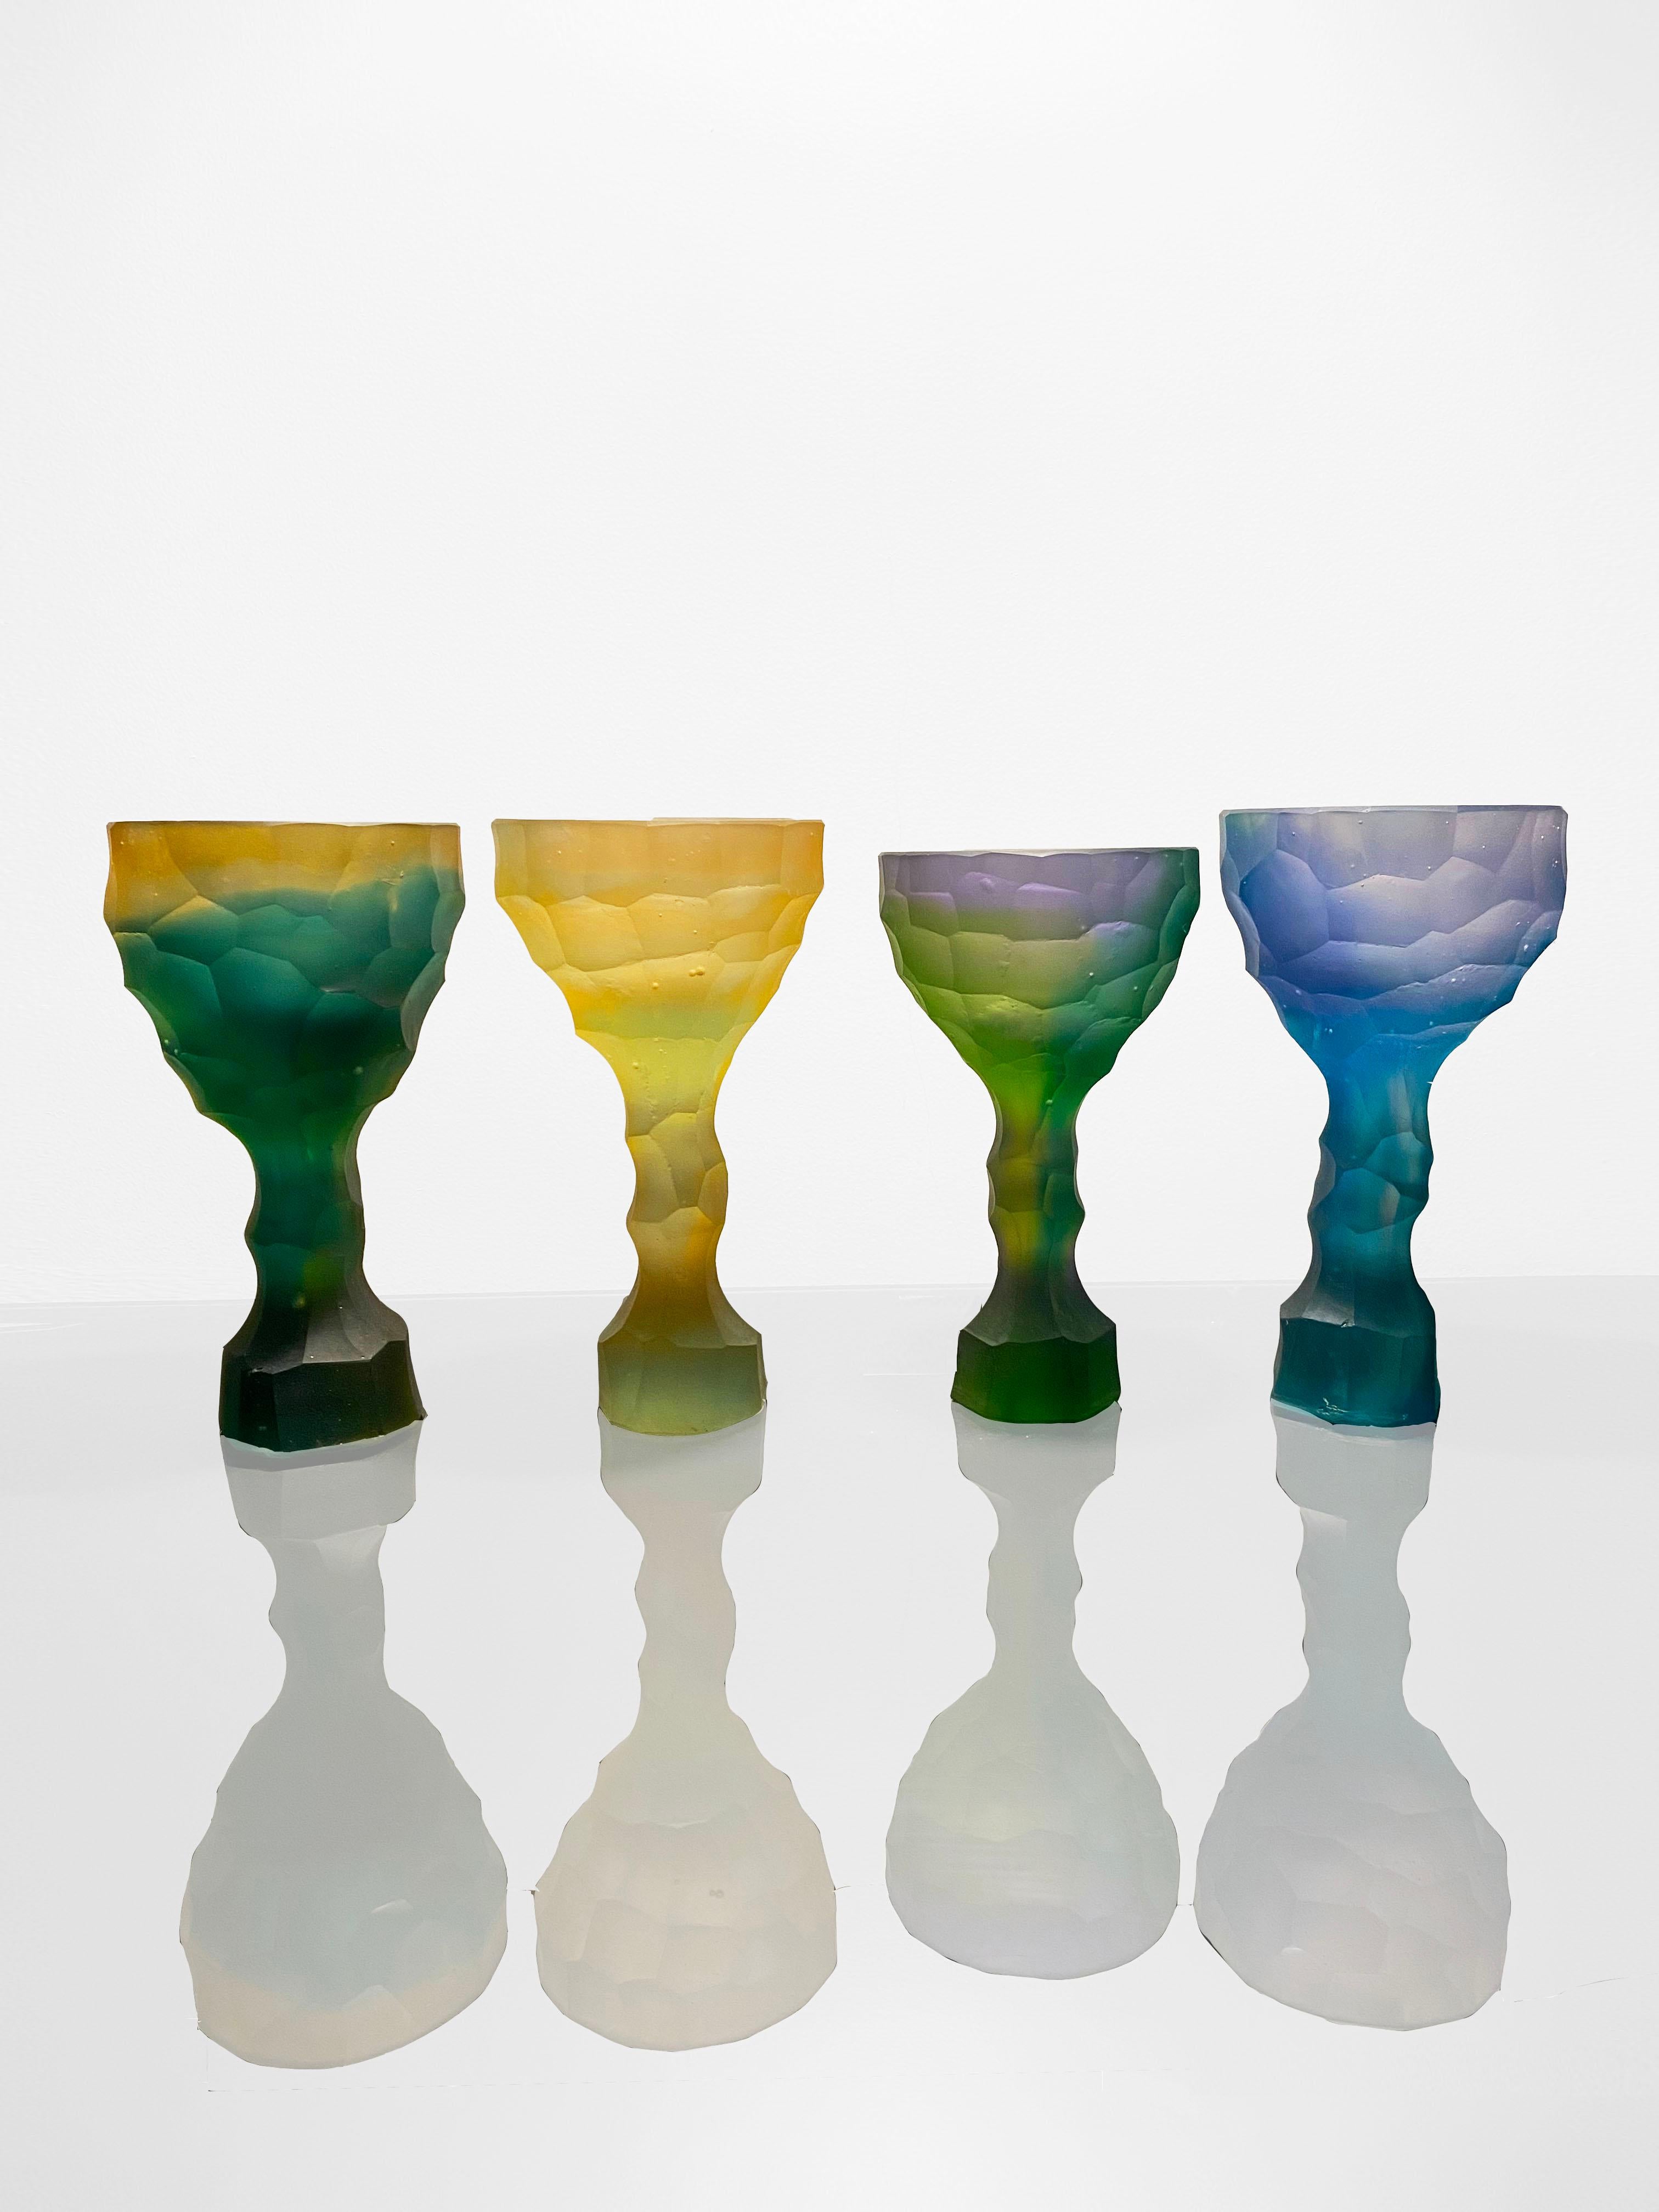 Set of 4 hand-sculpted crystal glass by Alissa Volchkova 
Dimensions: Height approximate 23
Materials: Crystal

Each glass is a unique hand-sculpted crystal glass by Alissa Volchkova so it will differ from the pictures.

Alissa Volchkova is a